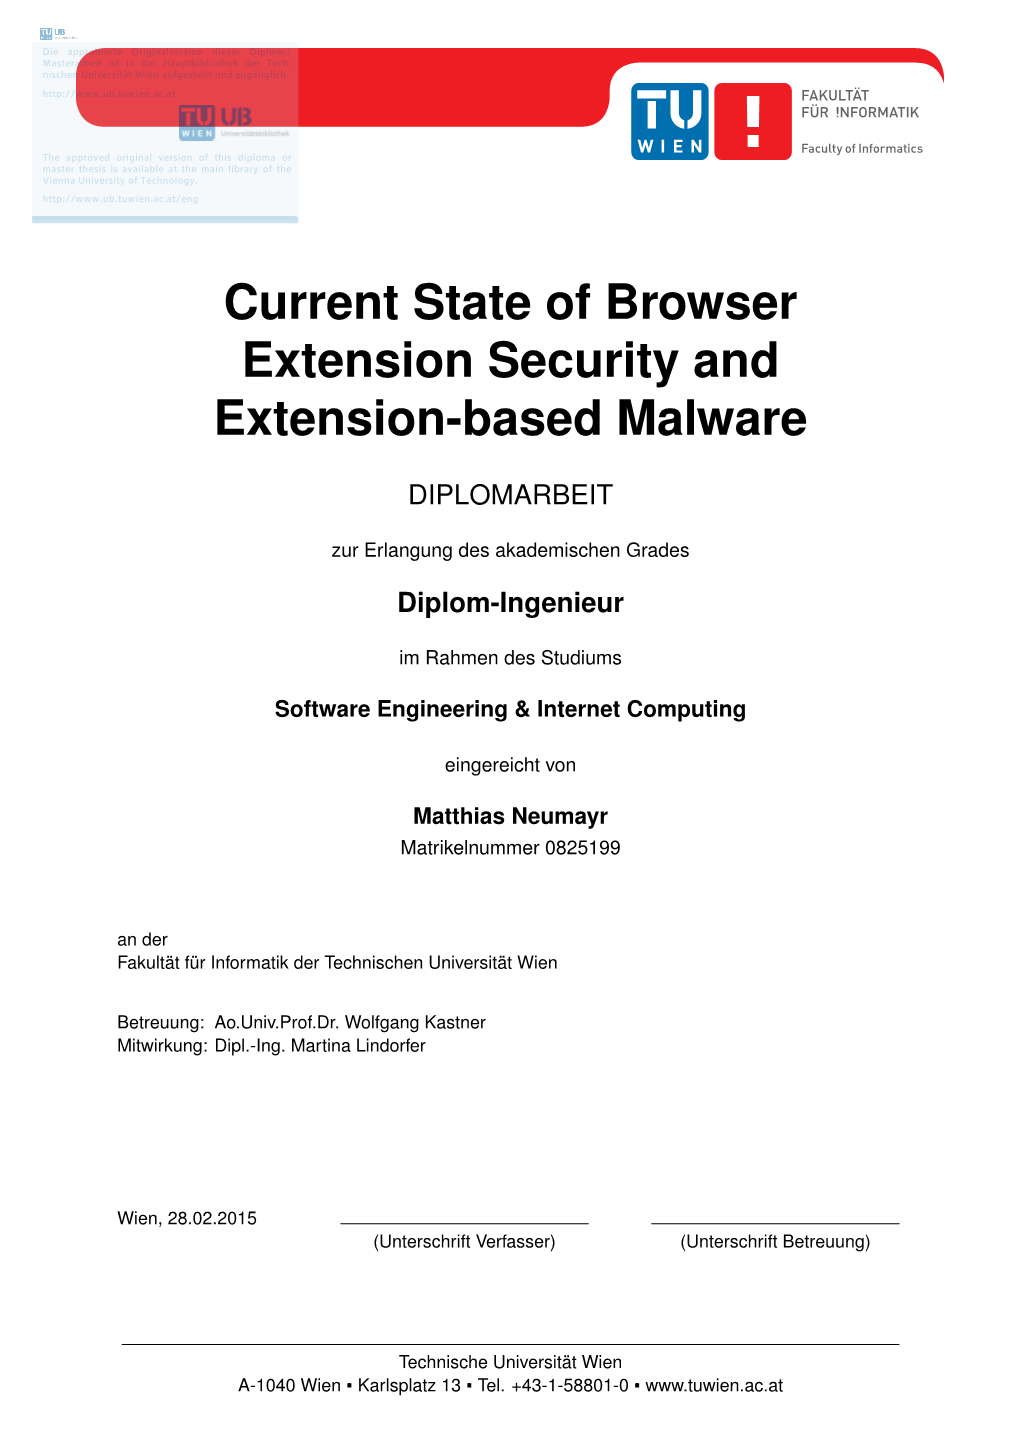 Current State of Browser Extension Security and Extension-Based Malware